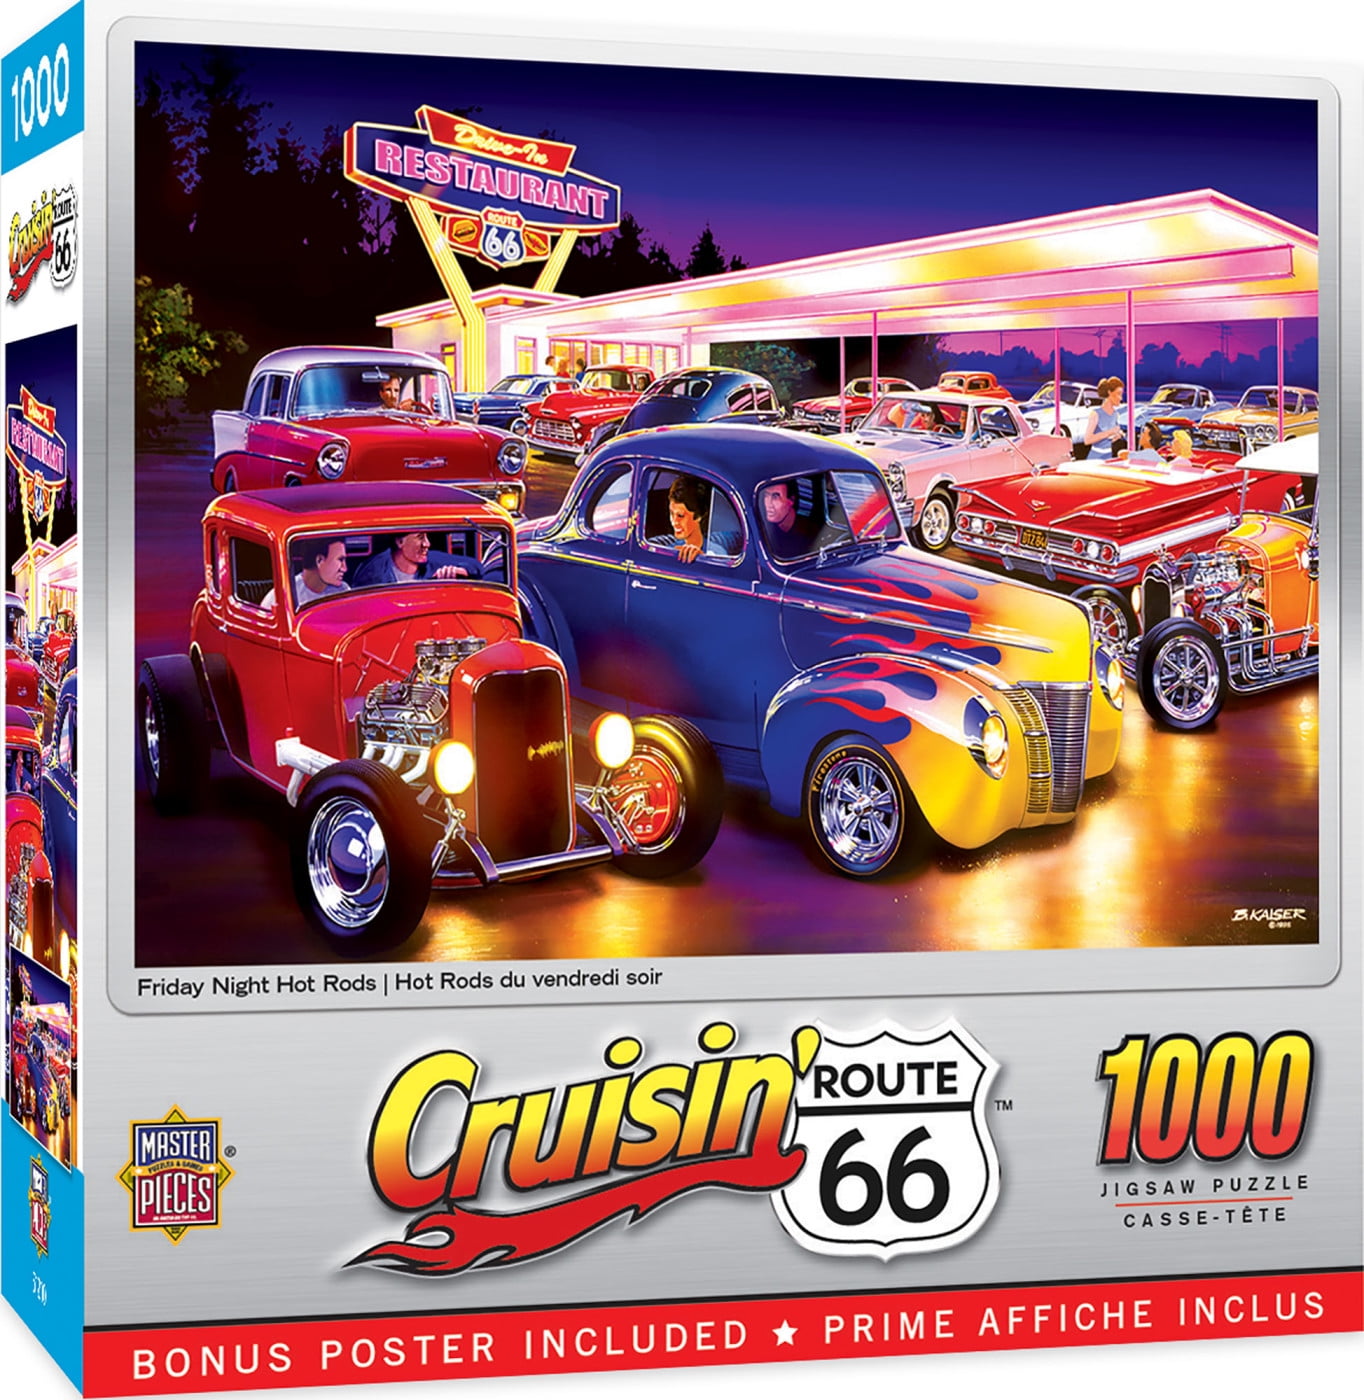 Masterpieces Crusin' Route 66 PITSTOP 1,000 piece jigsaw puzzle NEW 